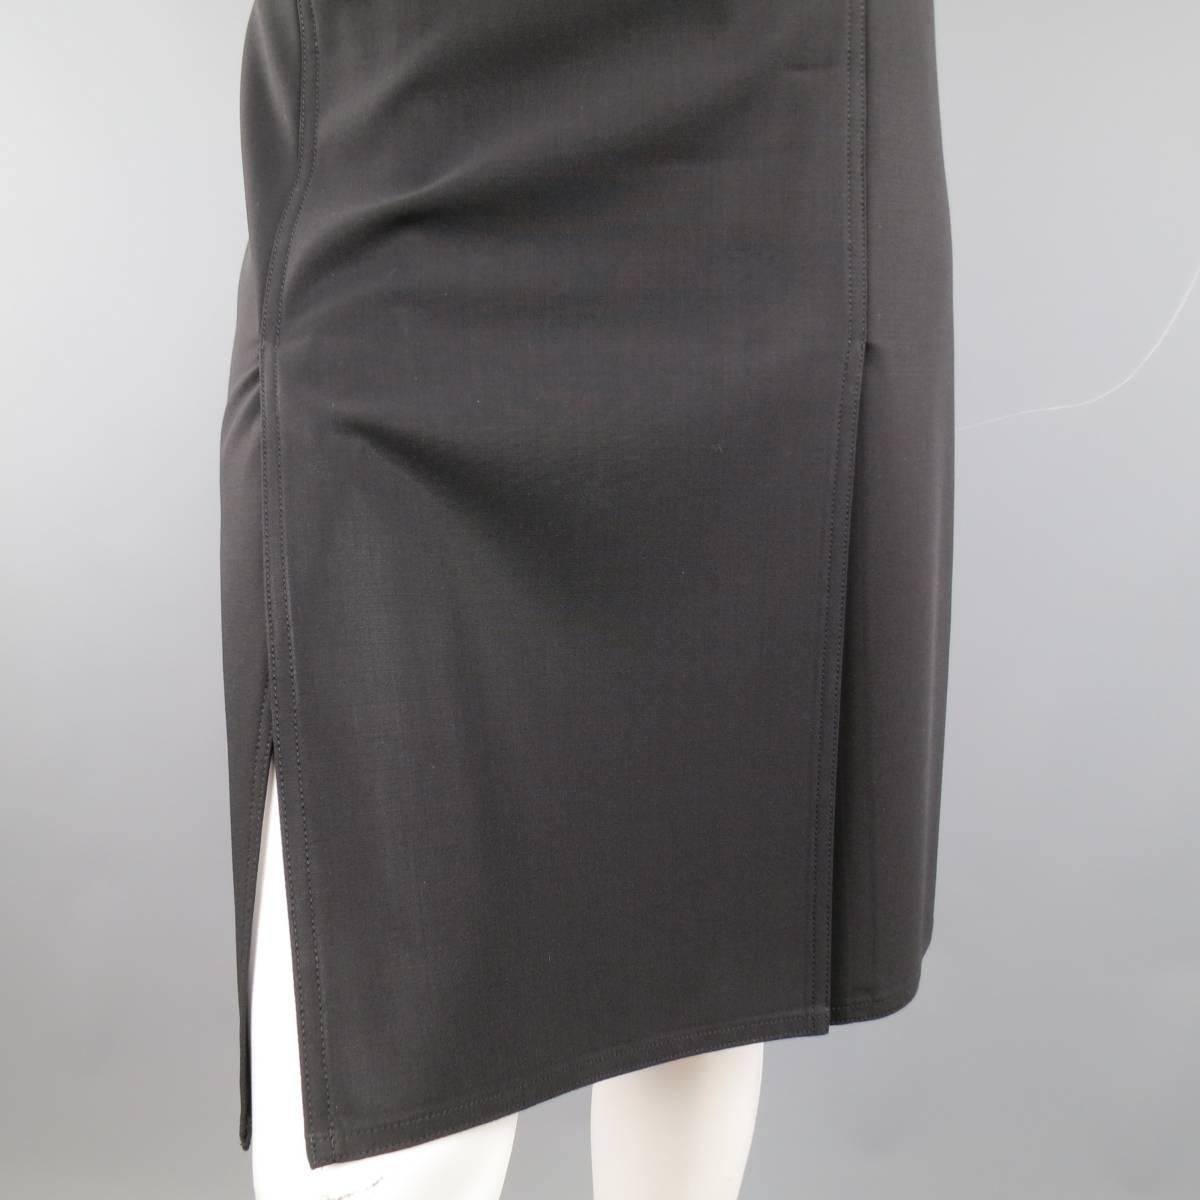 CELINE pencil skirt in a hick wool fabric featuring double symmetrical slits on front and back. Made in France.
 
Excellent Pre-Owned Condition.
Marked: 38
 
Measurements
Hips: 30 In.
Waste: 36 In.
Length: 23 In.